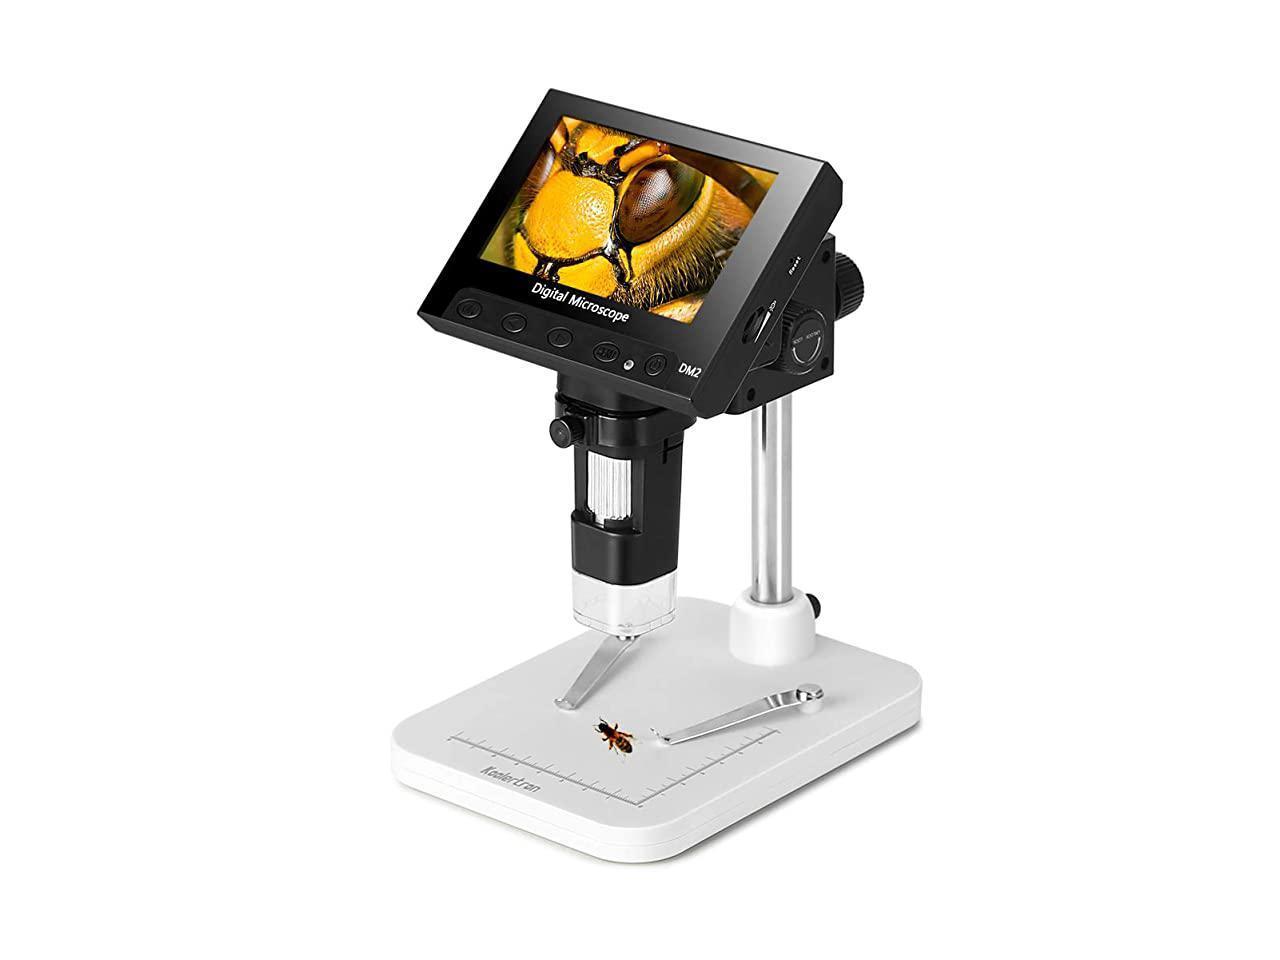 8 Adjustable LED Light 2 Megapixels USB Microscope Camera Video Recorder for Repair Soldering 4.3 Inch LCD Digital USB Microscope Endoscope Record 600X Magnification Zoom Micro-SD Storage 